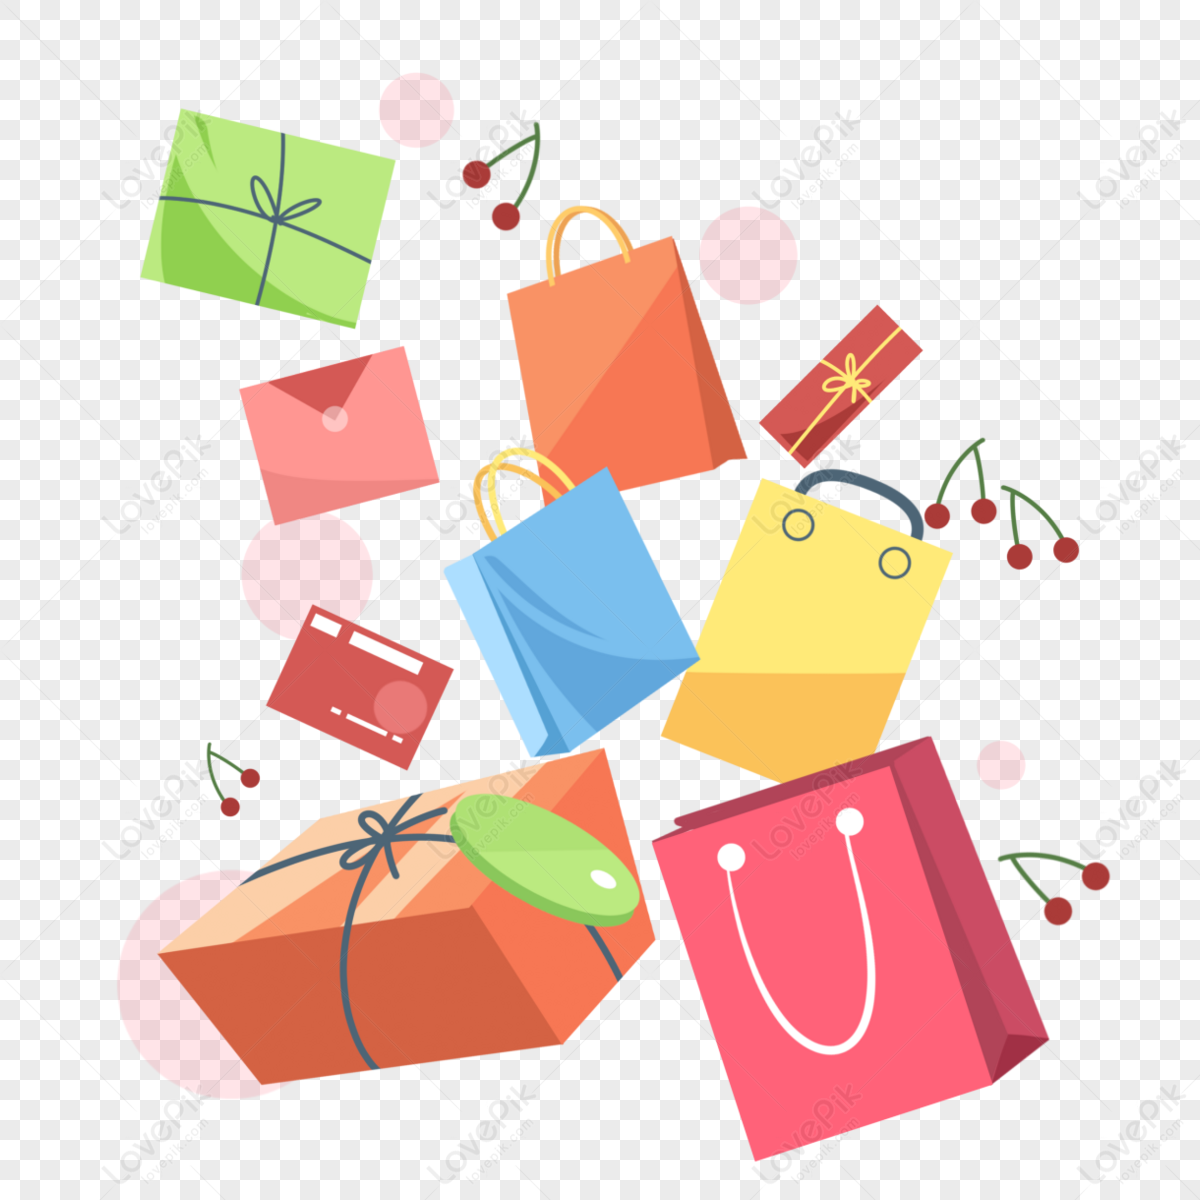 Gift Bags Transparent background 15100053 PNG